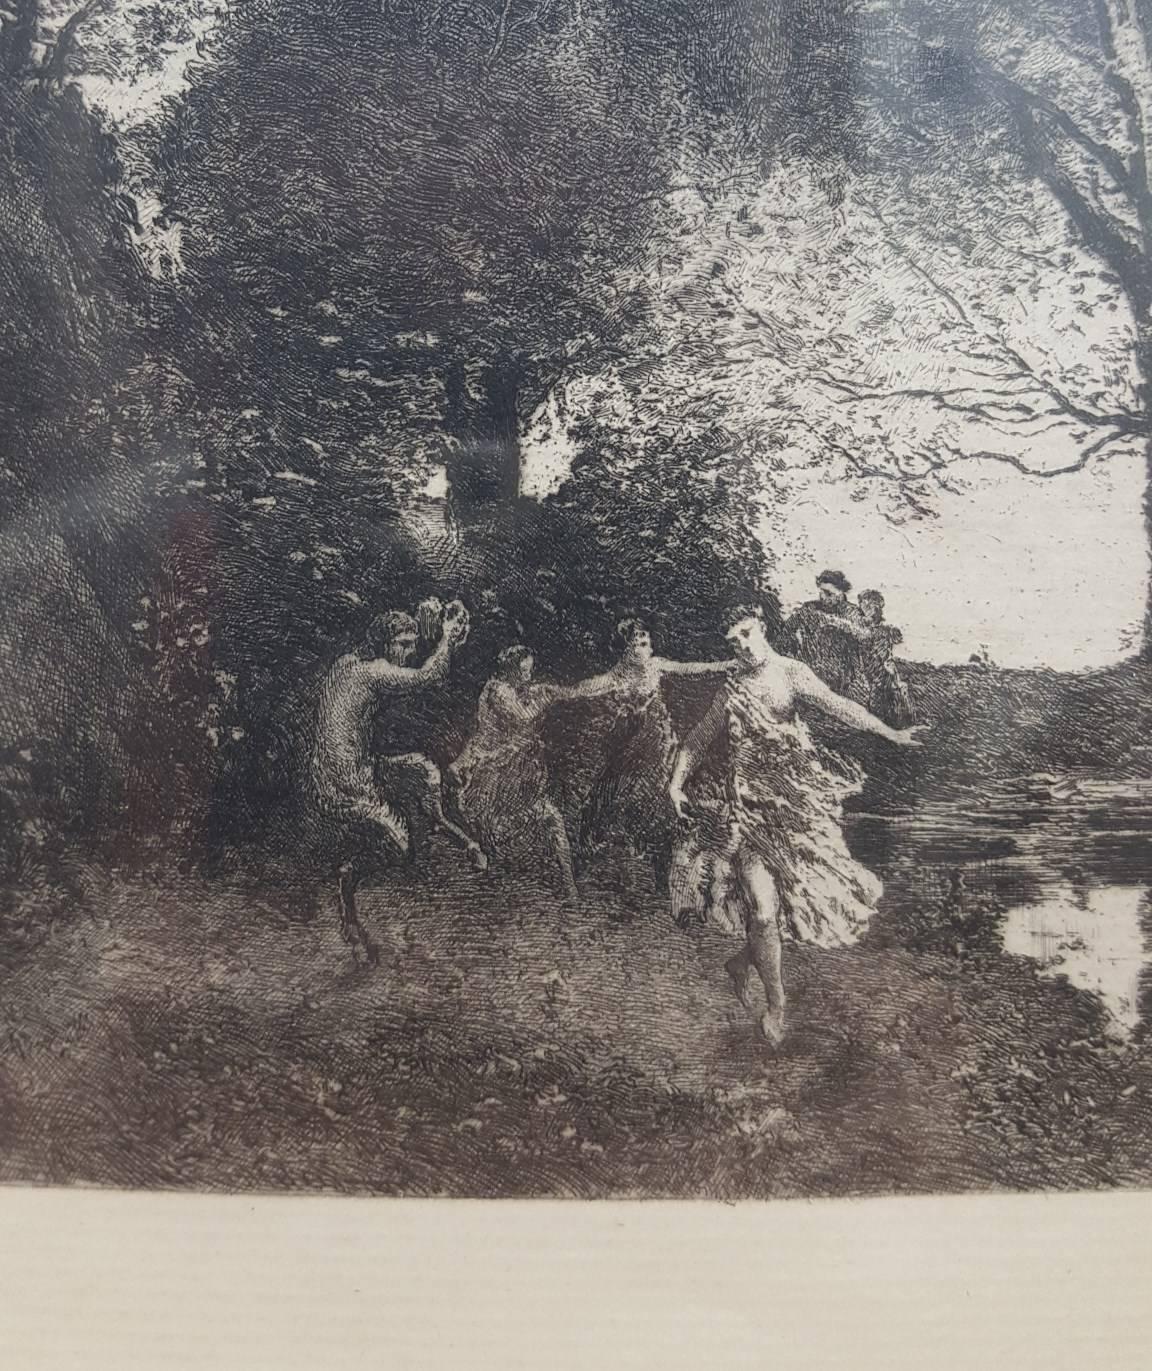 Nymphs and Fauns - Barbizon School Print by (after) Jean-Baptiste-Camille Corot